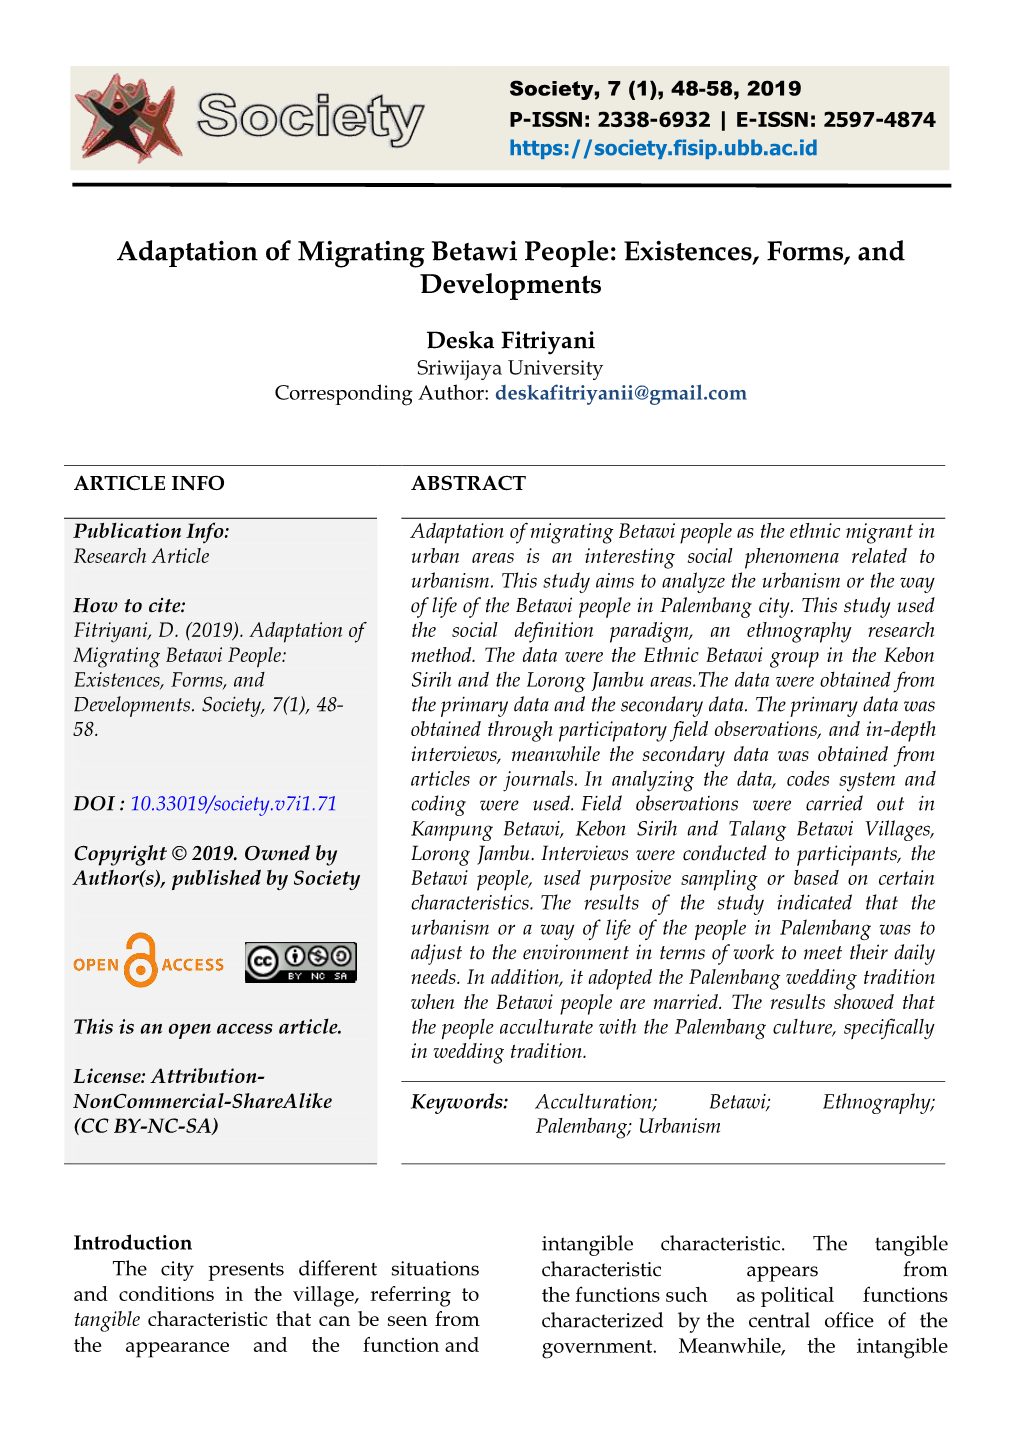 Adaptation of Migrating Betawi People: Existences, Forms, and Developments